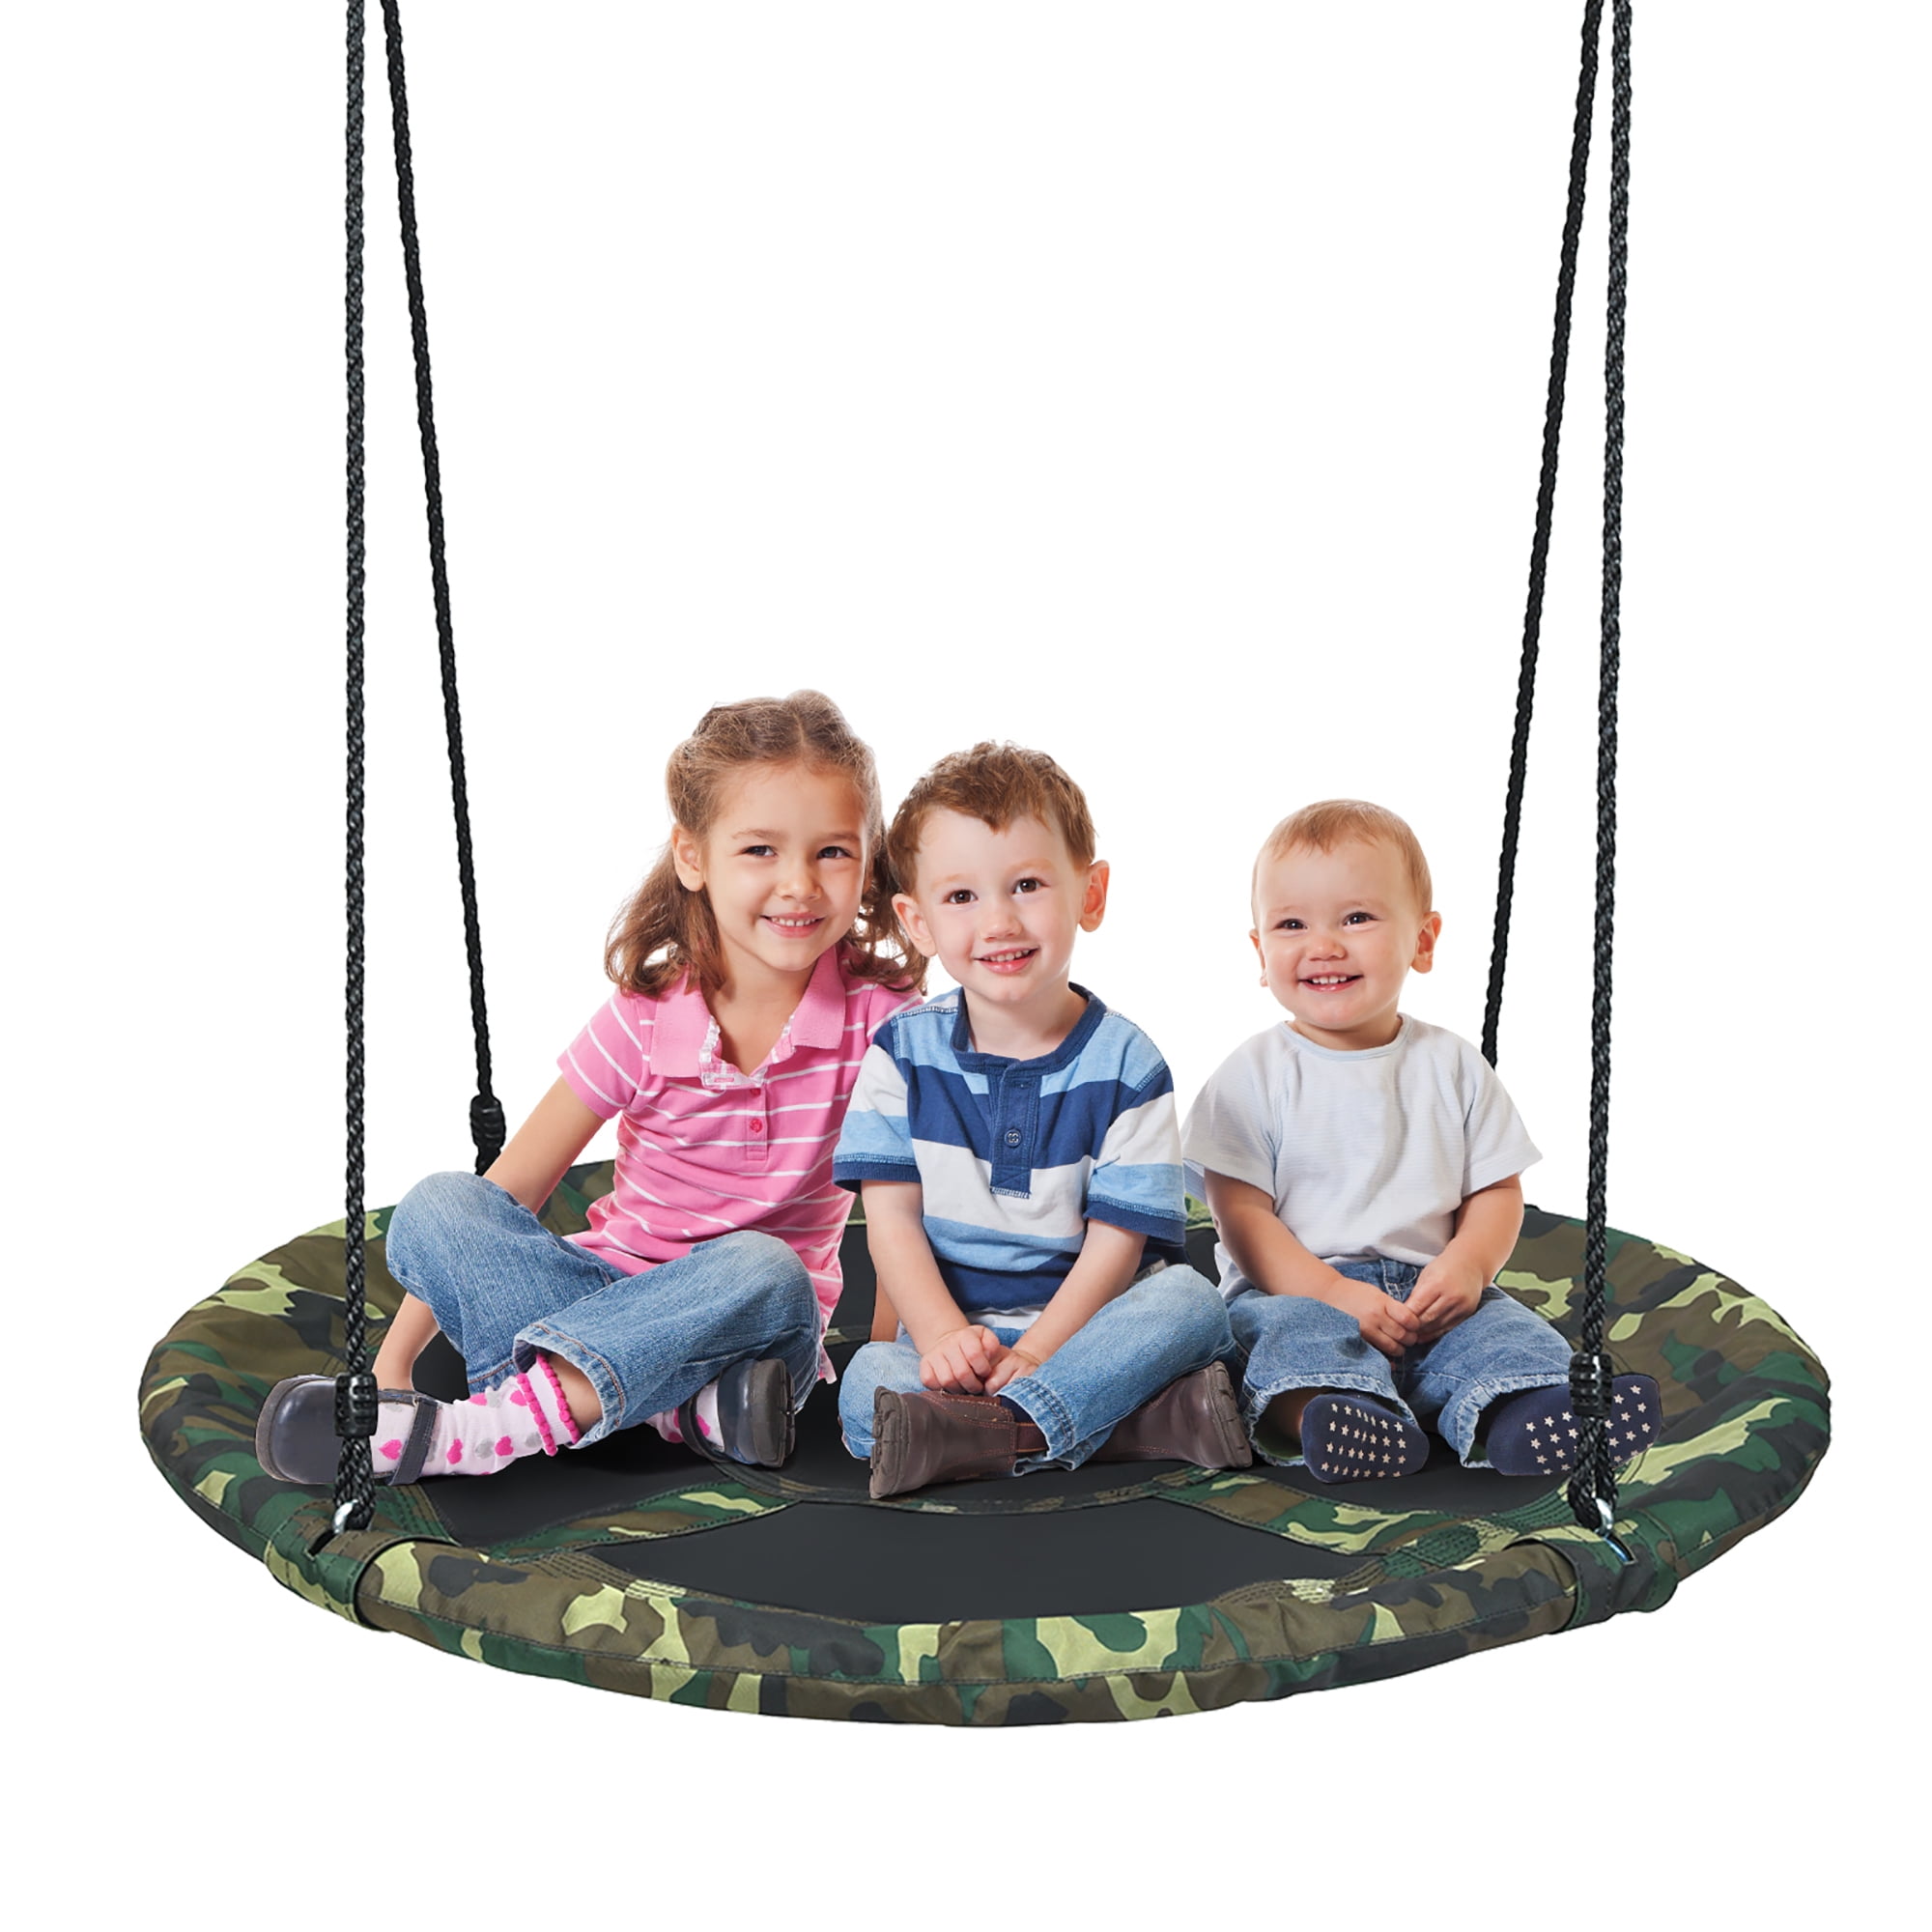 Details about   40" Flying Saucer Tree Swing Nest for Kids 700 lbs Easy Install Steel Frame US 